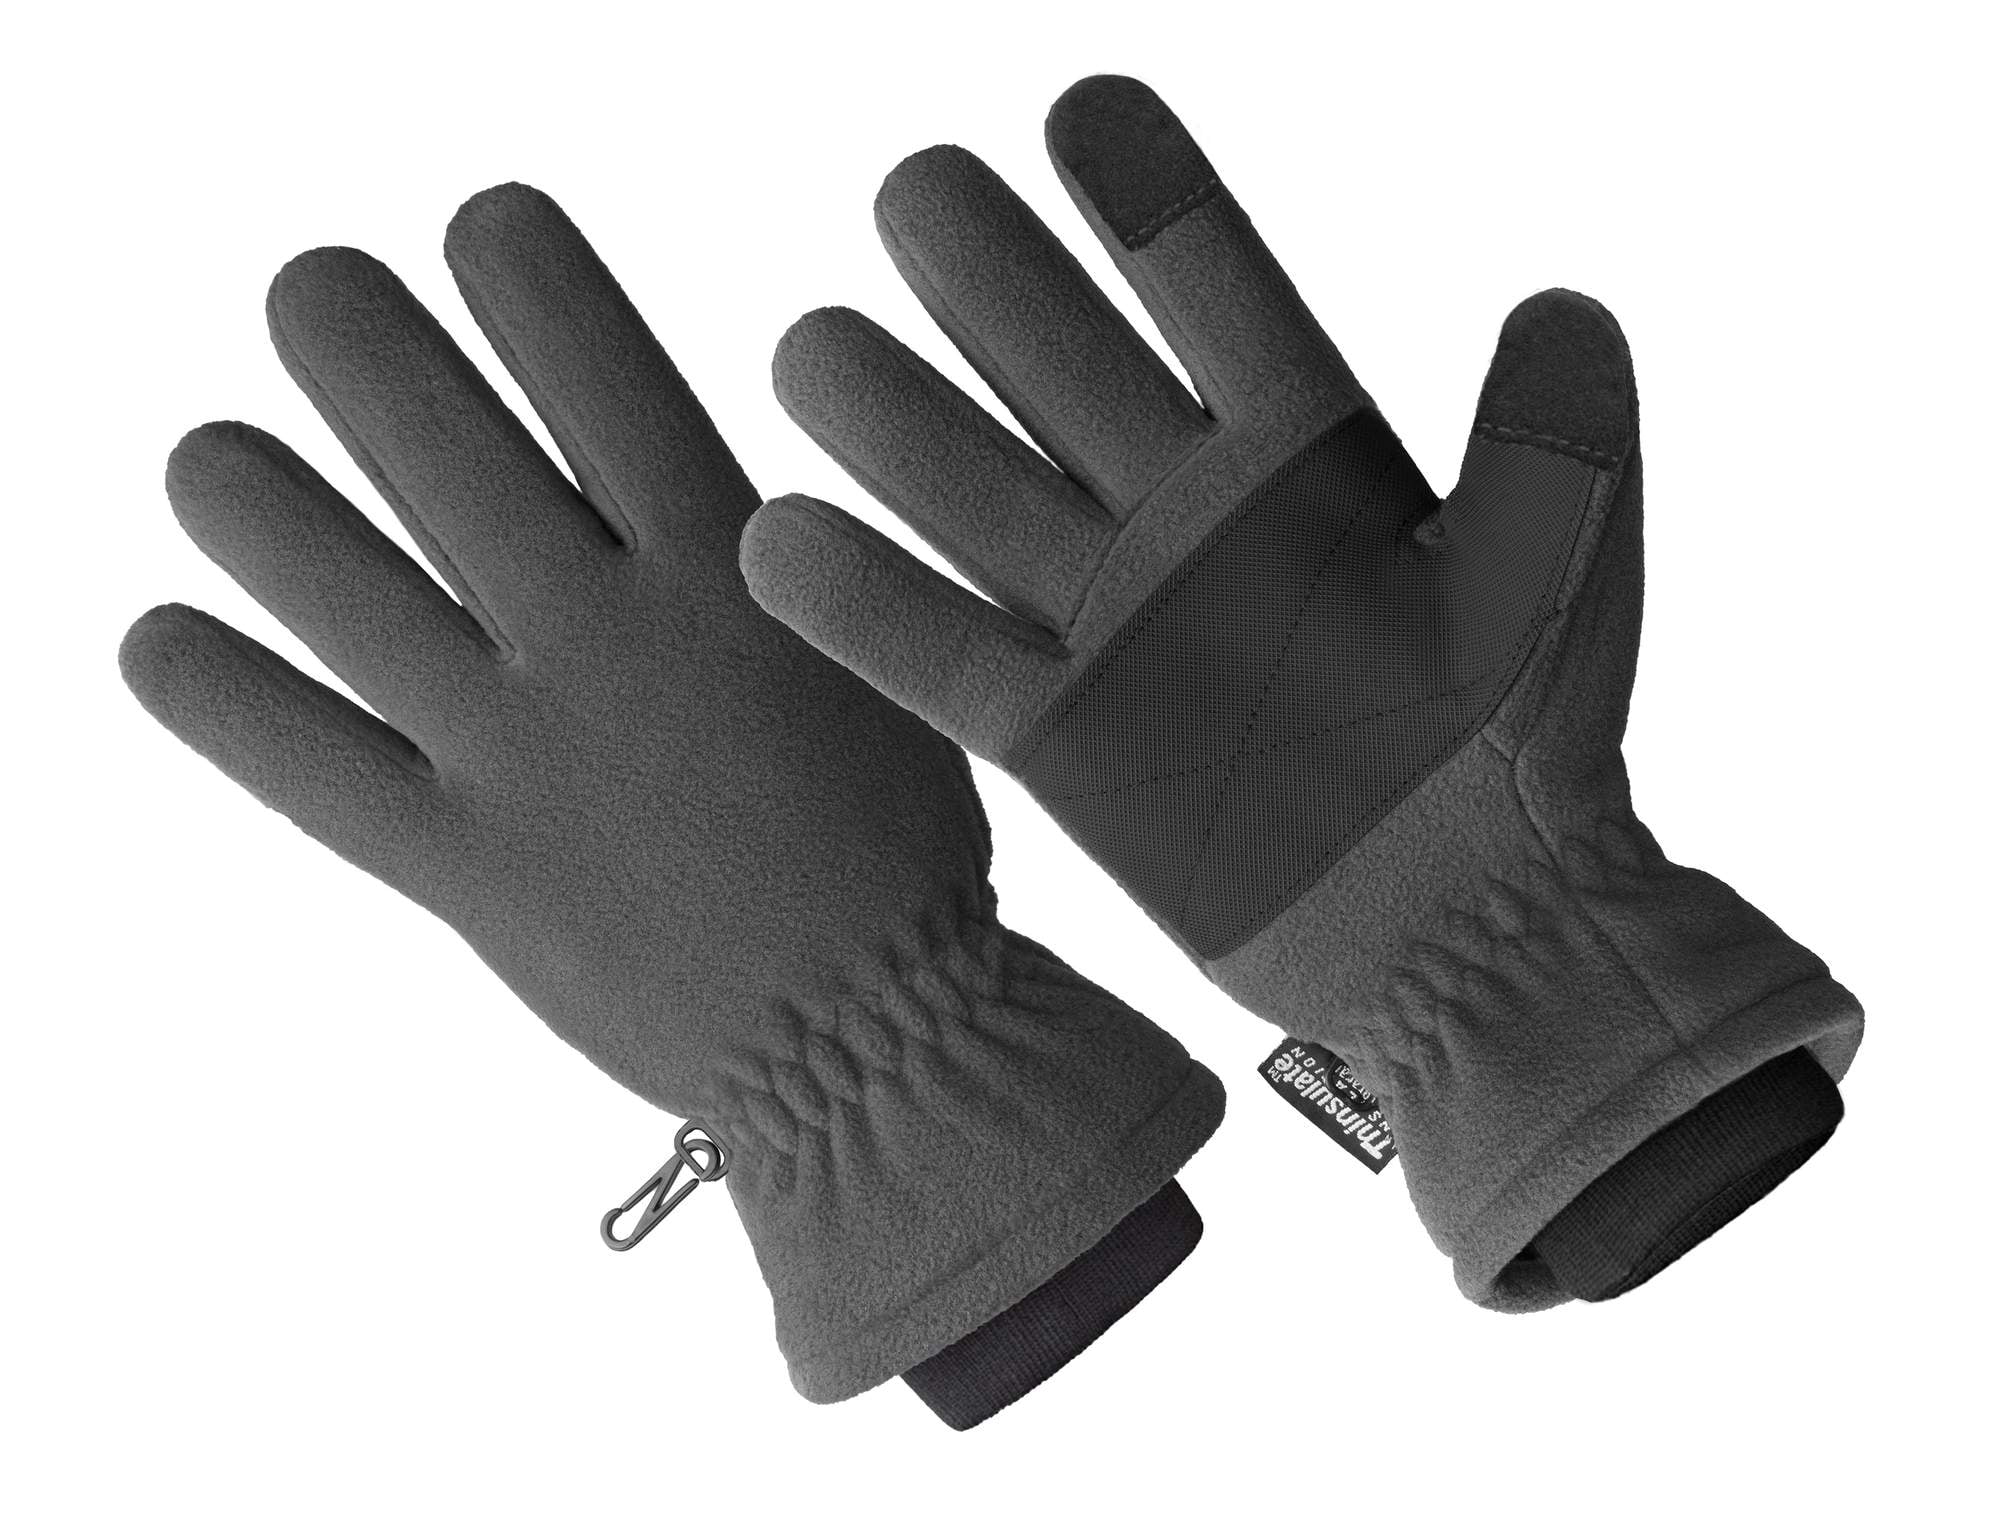 All Weather Winter Water Resistant Gloves Fleece Lined Black Touchscreen Gloves 